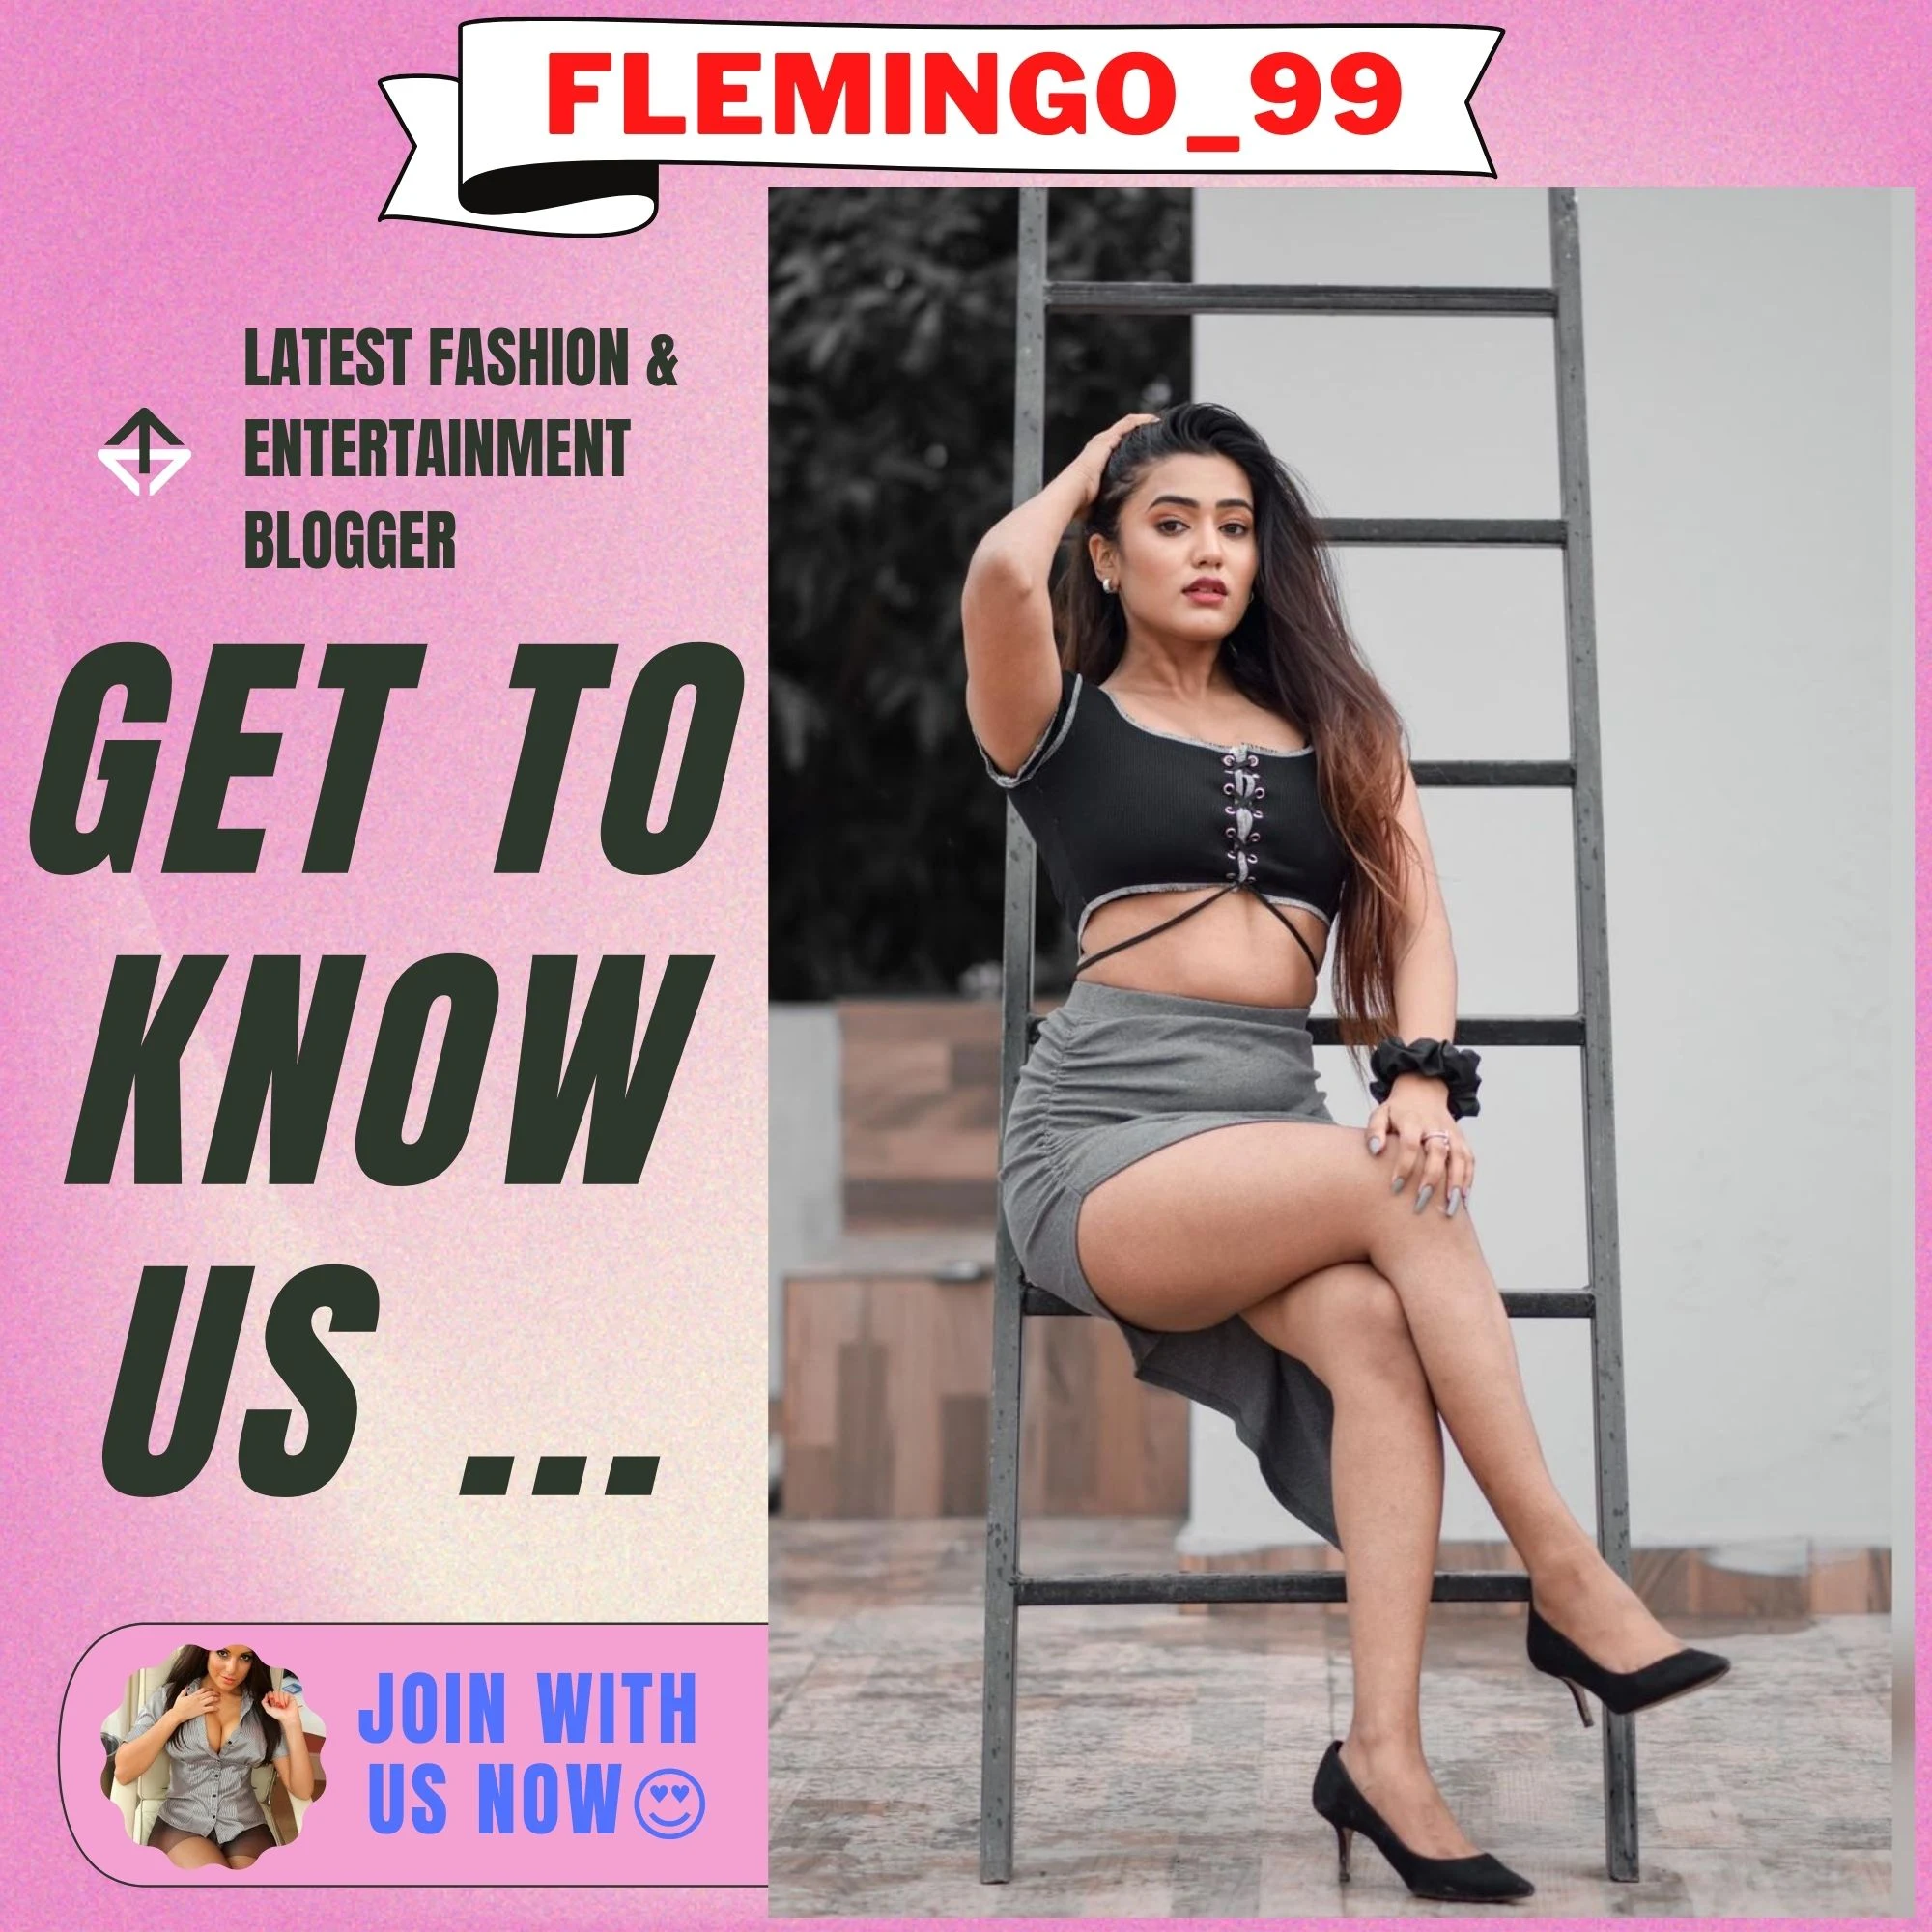 Privacy policy of flemingo9to99